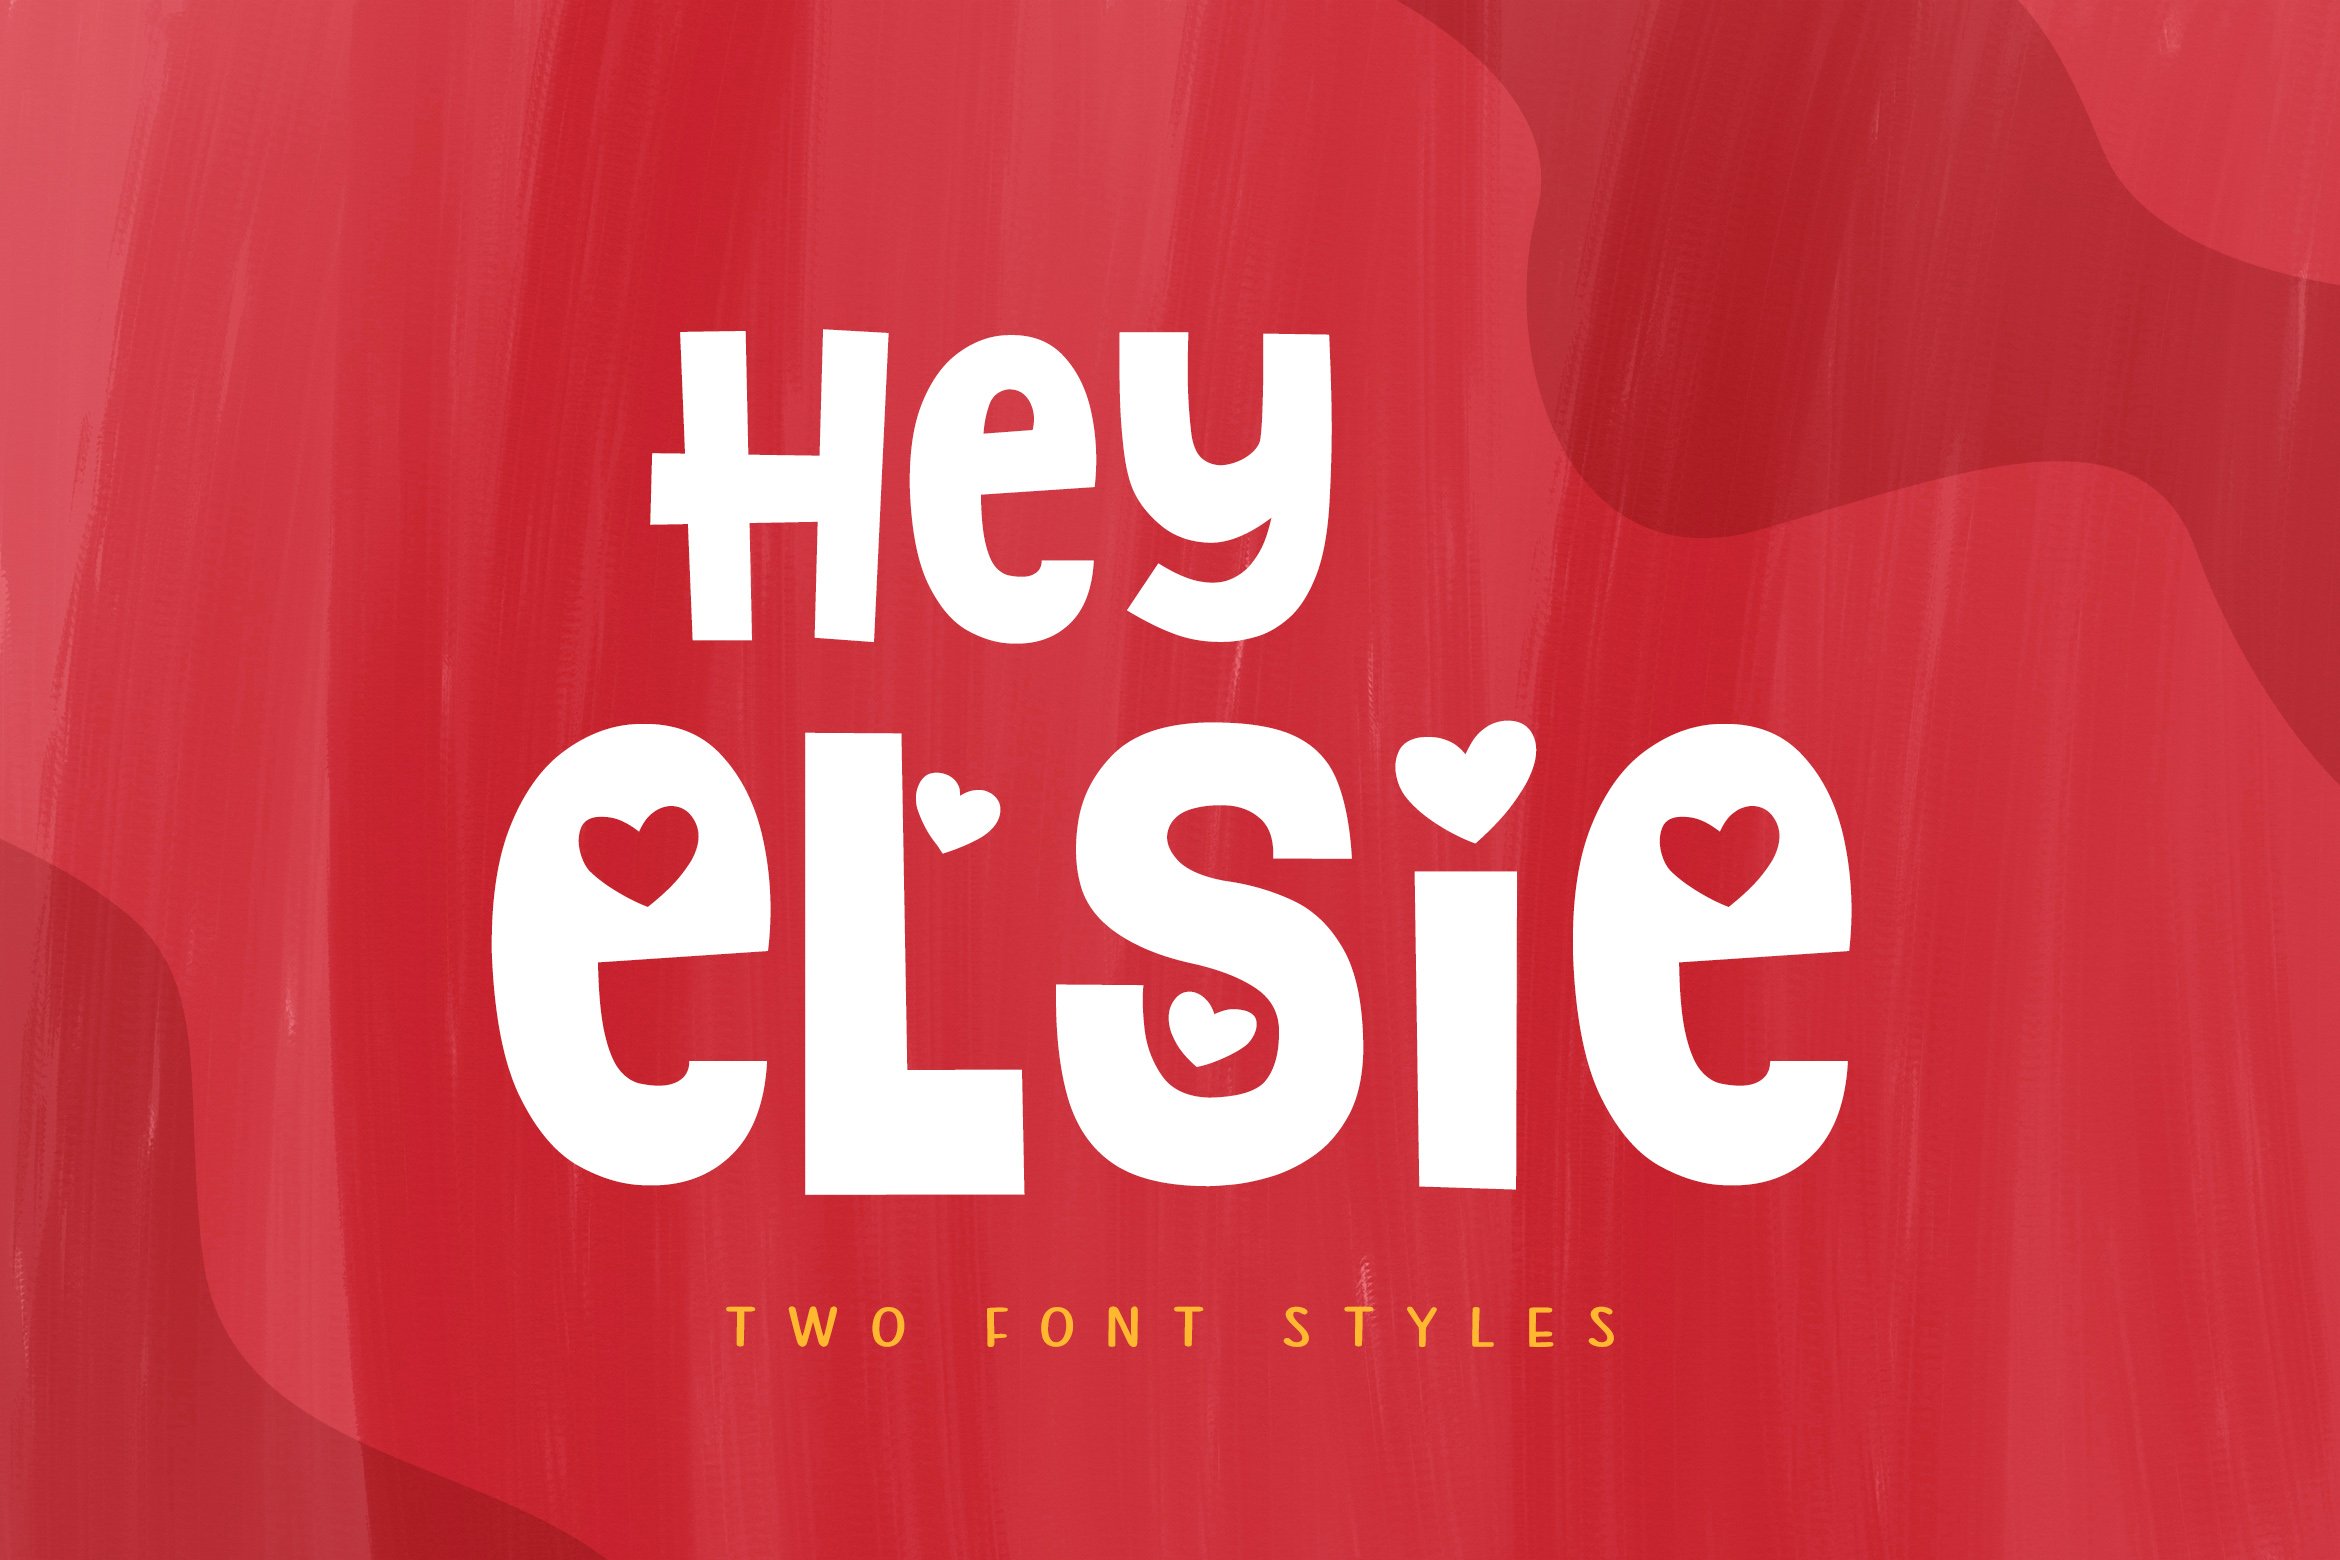 Hey Elsie ~ Two Font Styles cover image.